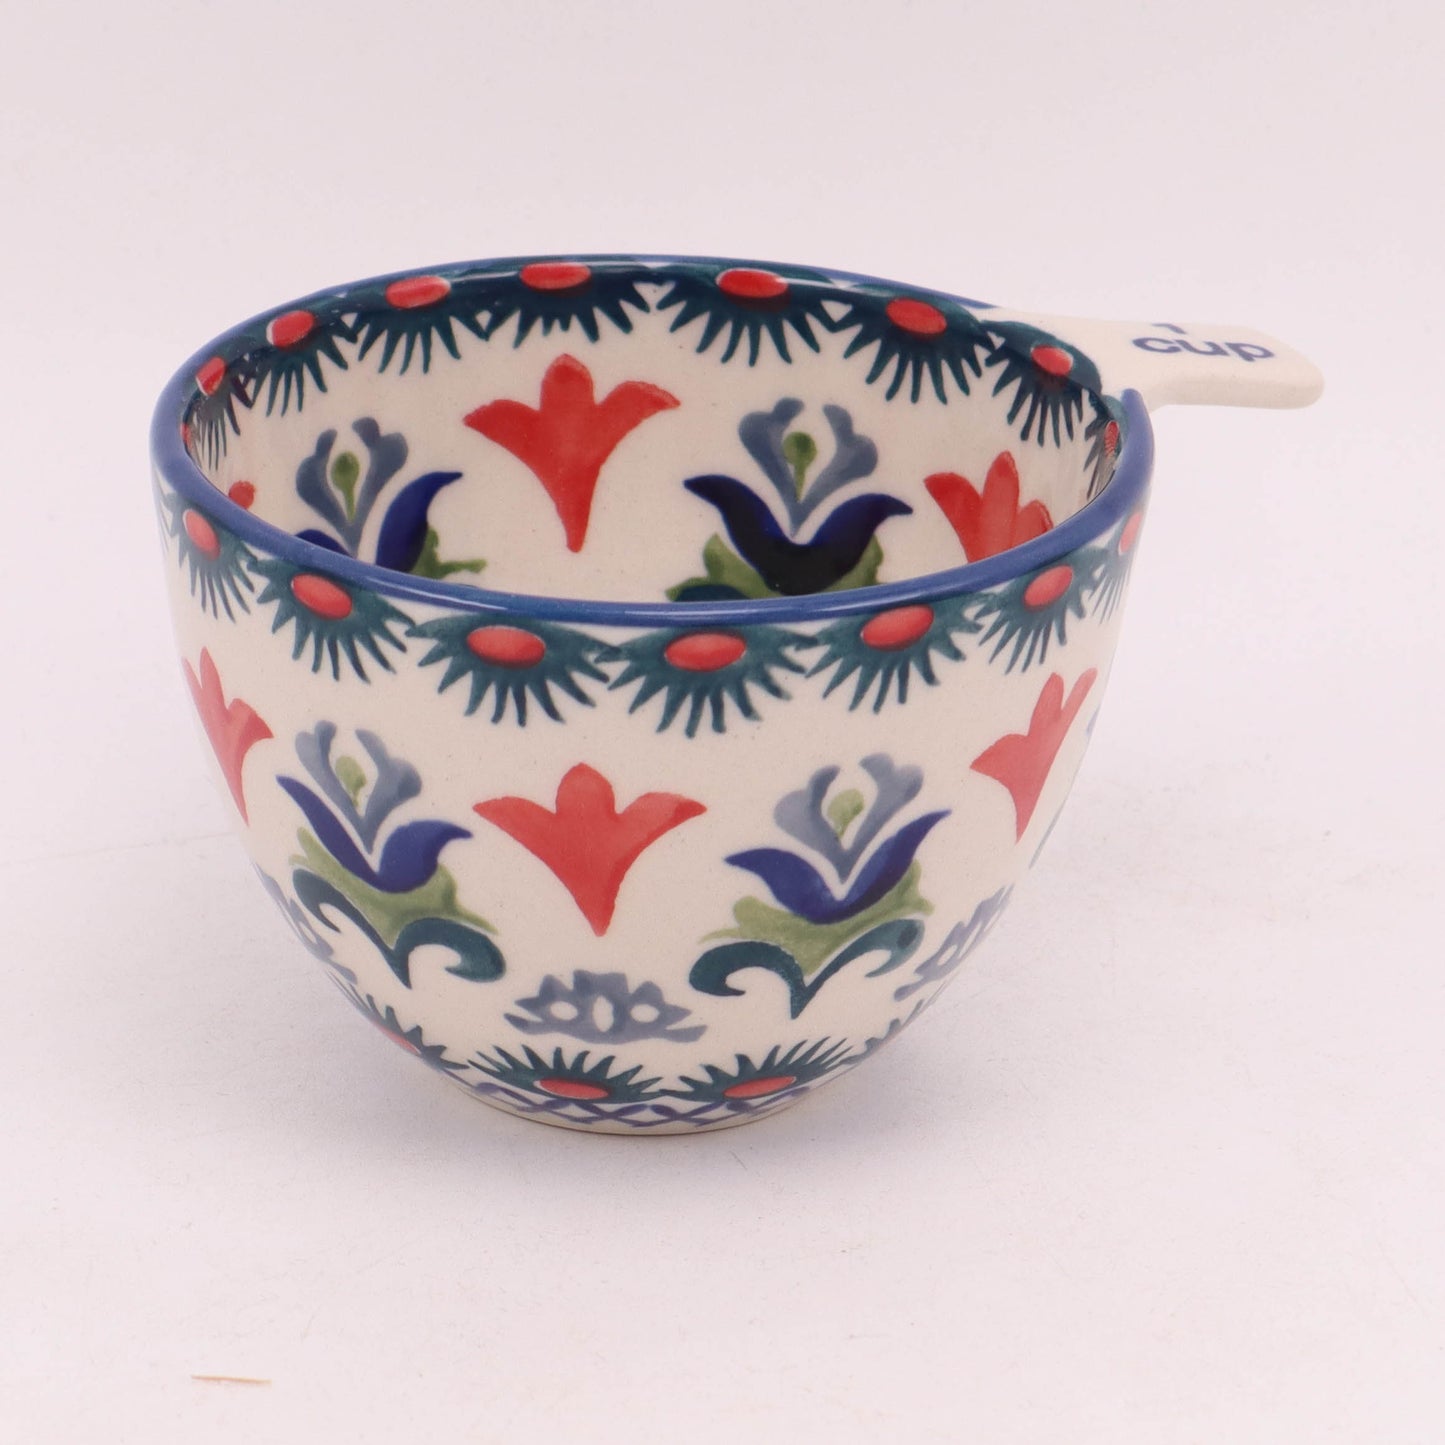 1 Cup Measuring Cup. Pattern: Dutch